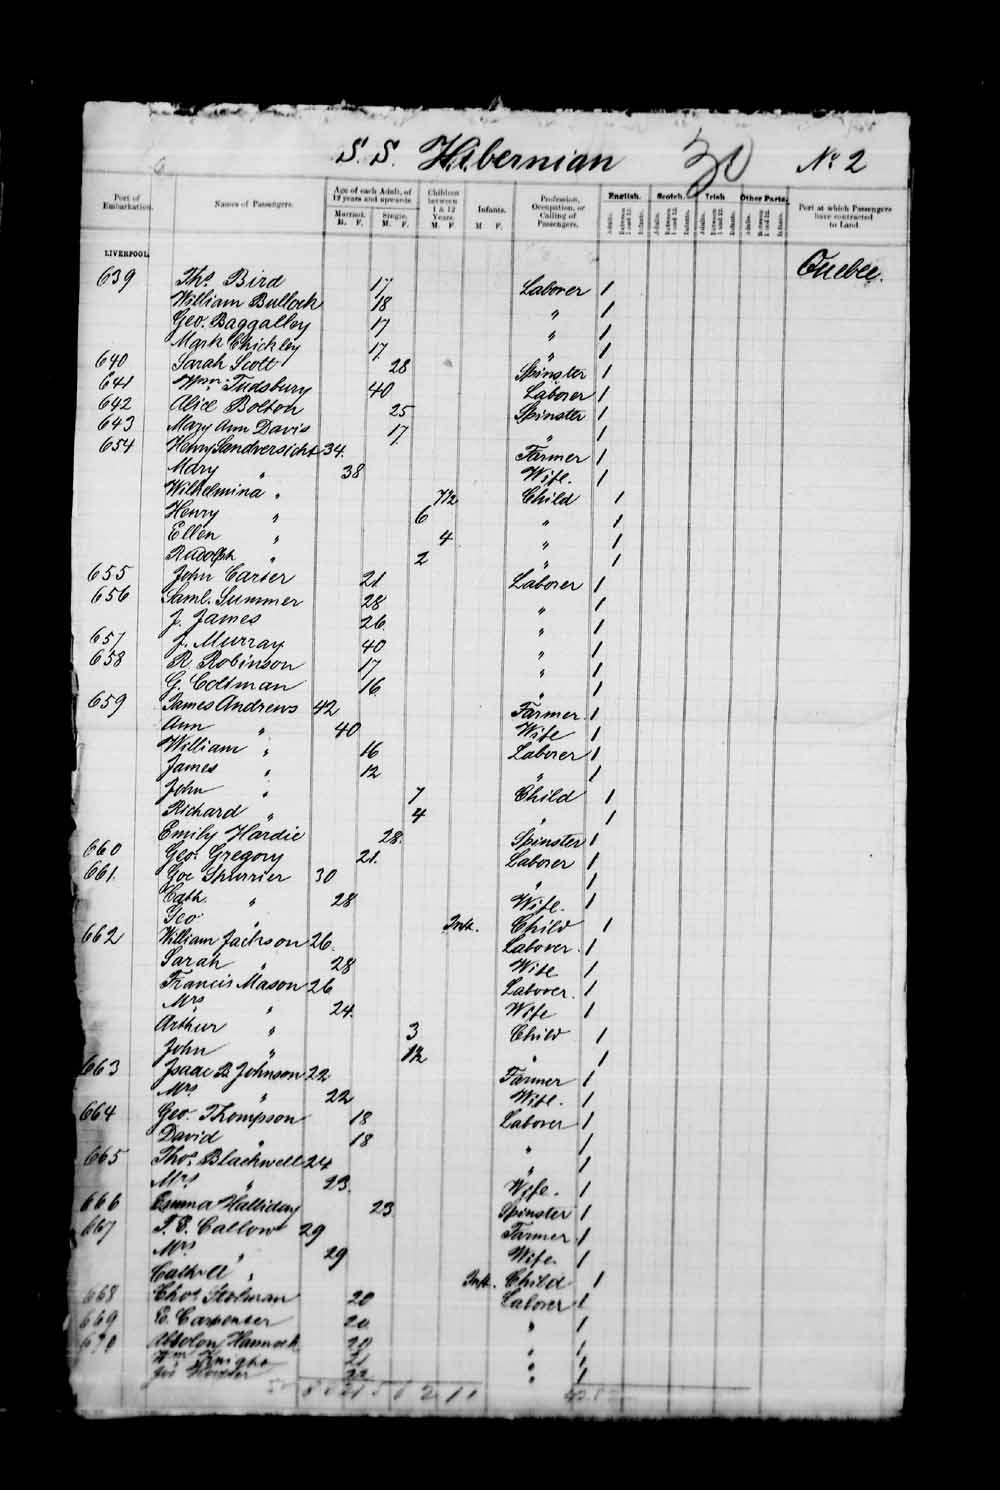 Digitized page of Passenger Lists for Image No.: e003530482